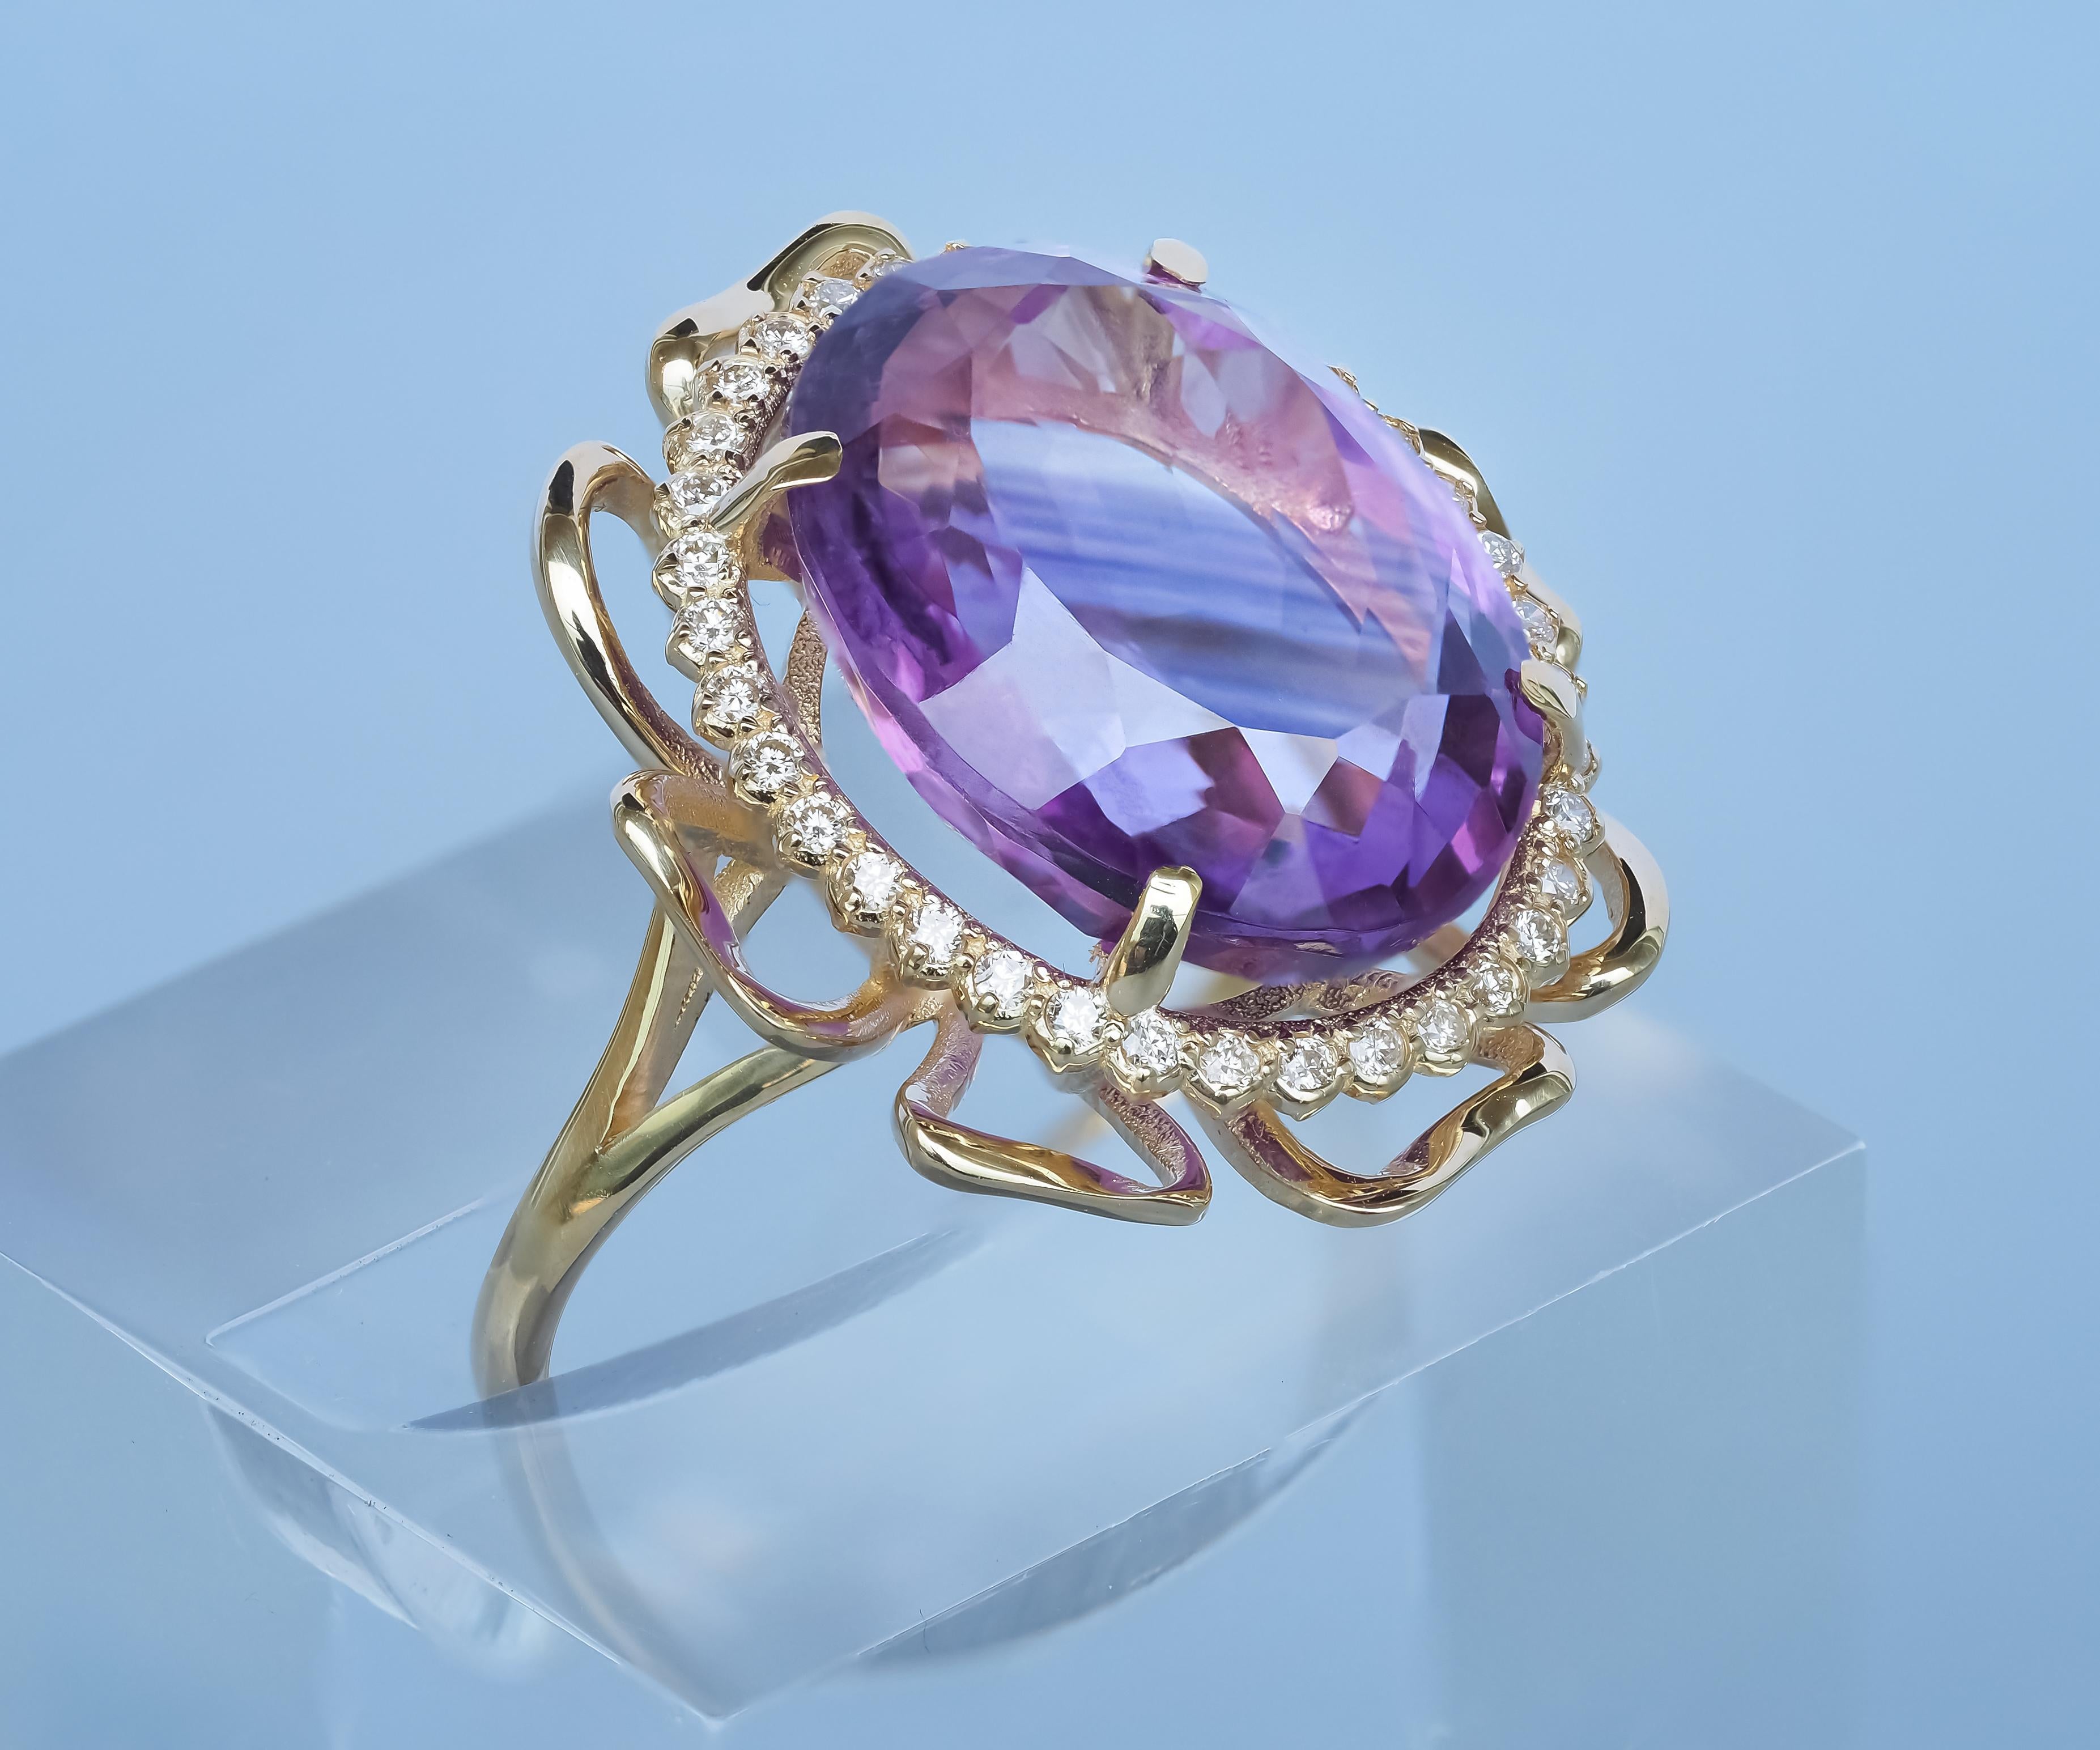 For Sale:  14 Karat Gold Flower Ring with Amethyst and Diamonds 4